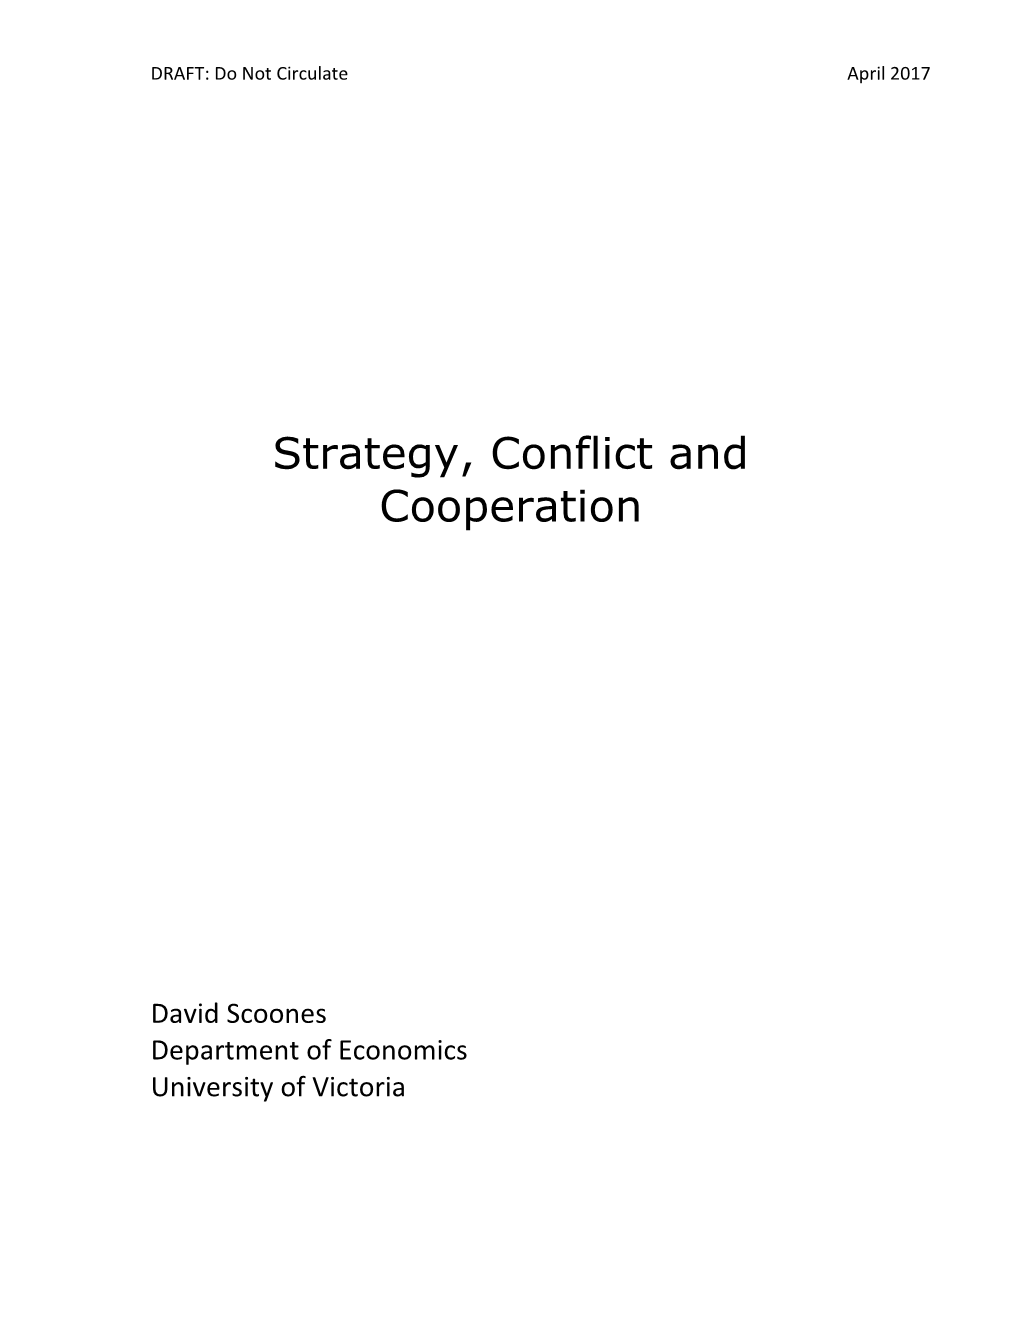 Strategy, Conflict and Cooperation